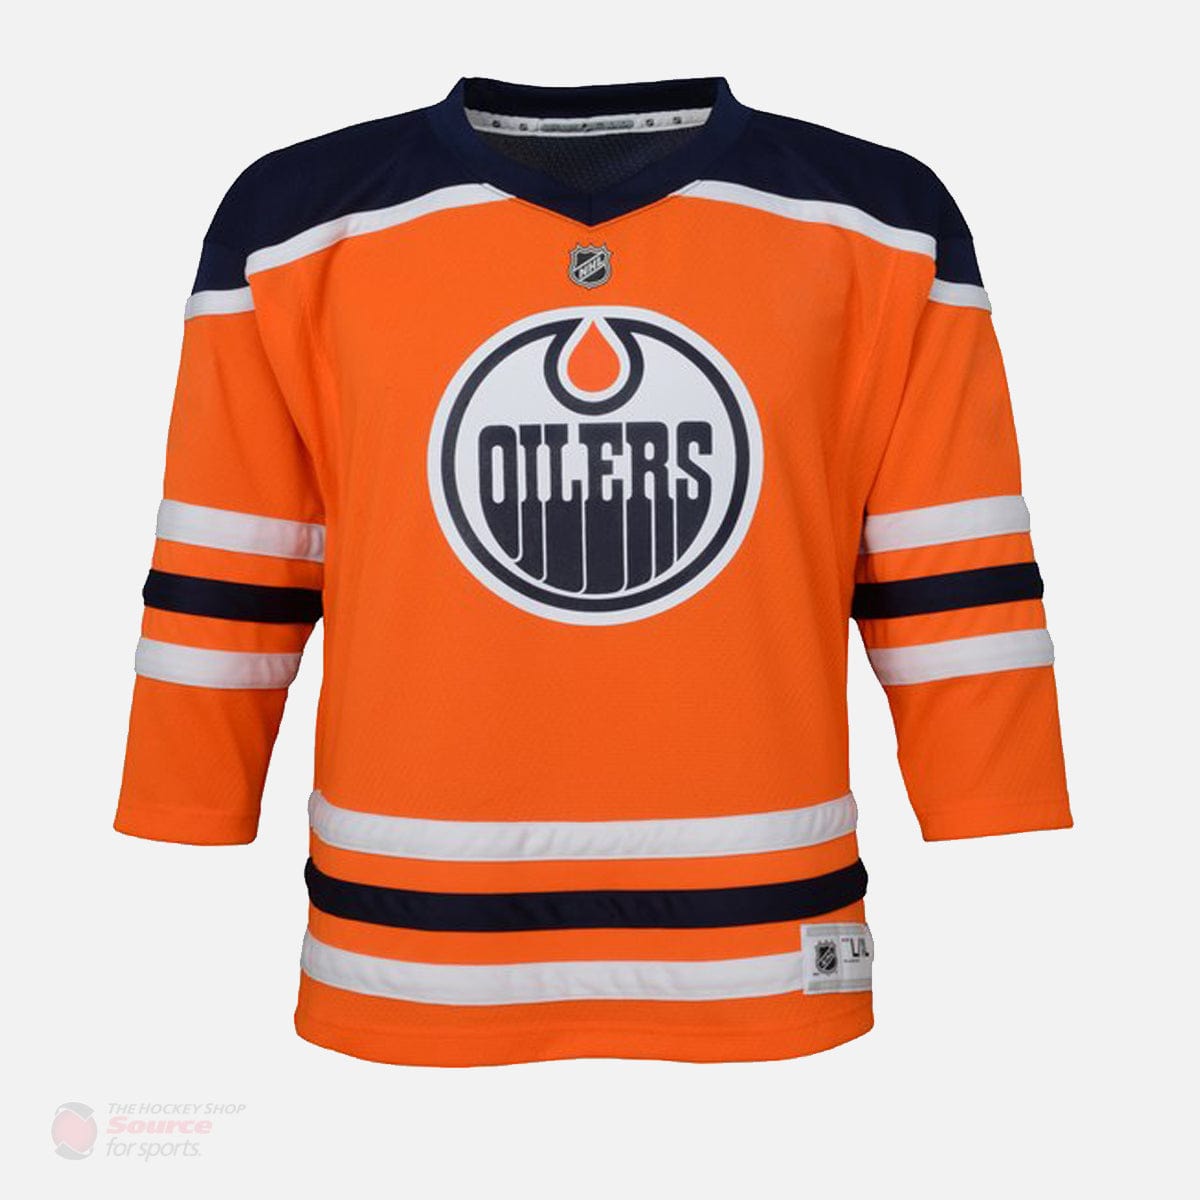 Edmonton Oilers Home Outer Stuff Replica Youth Jersey